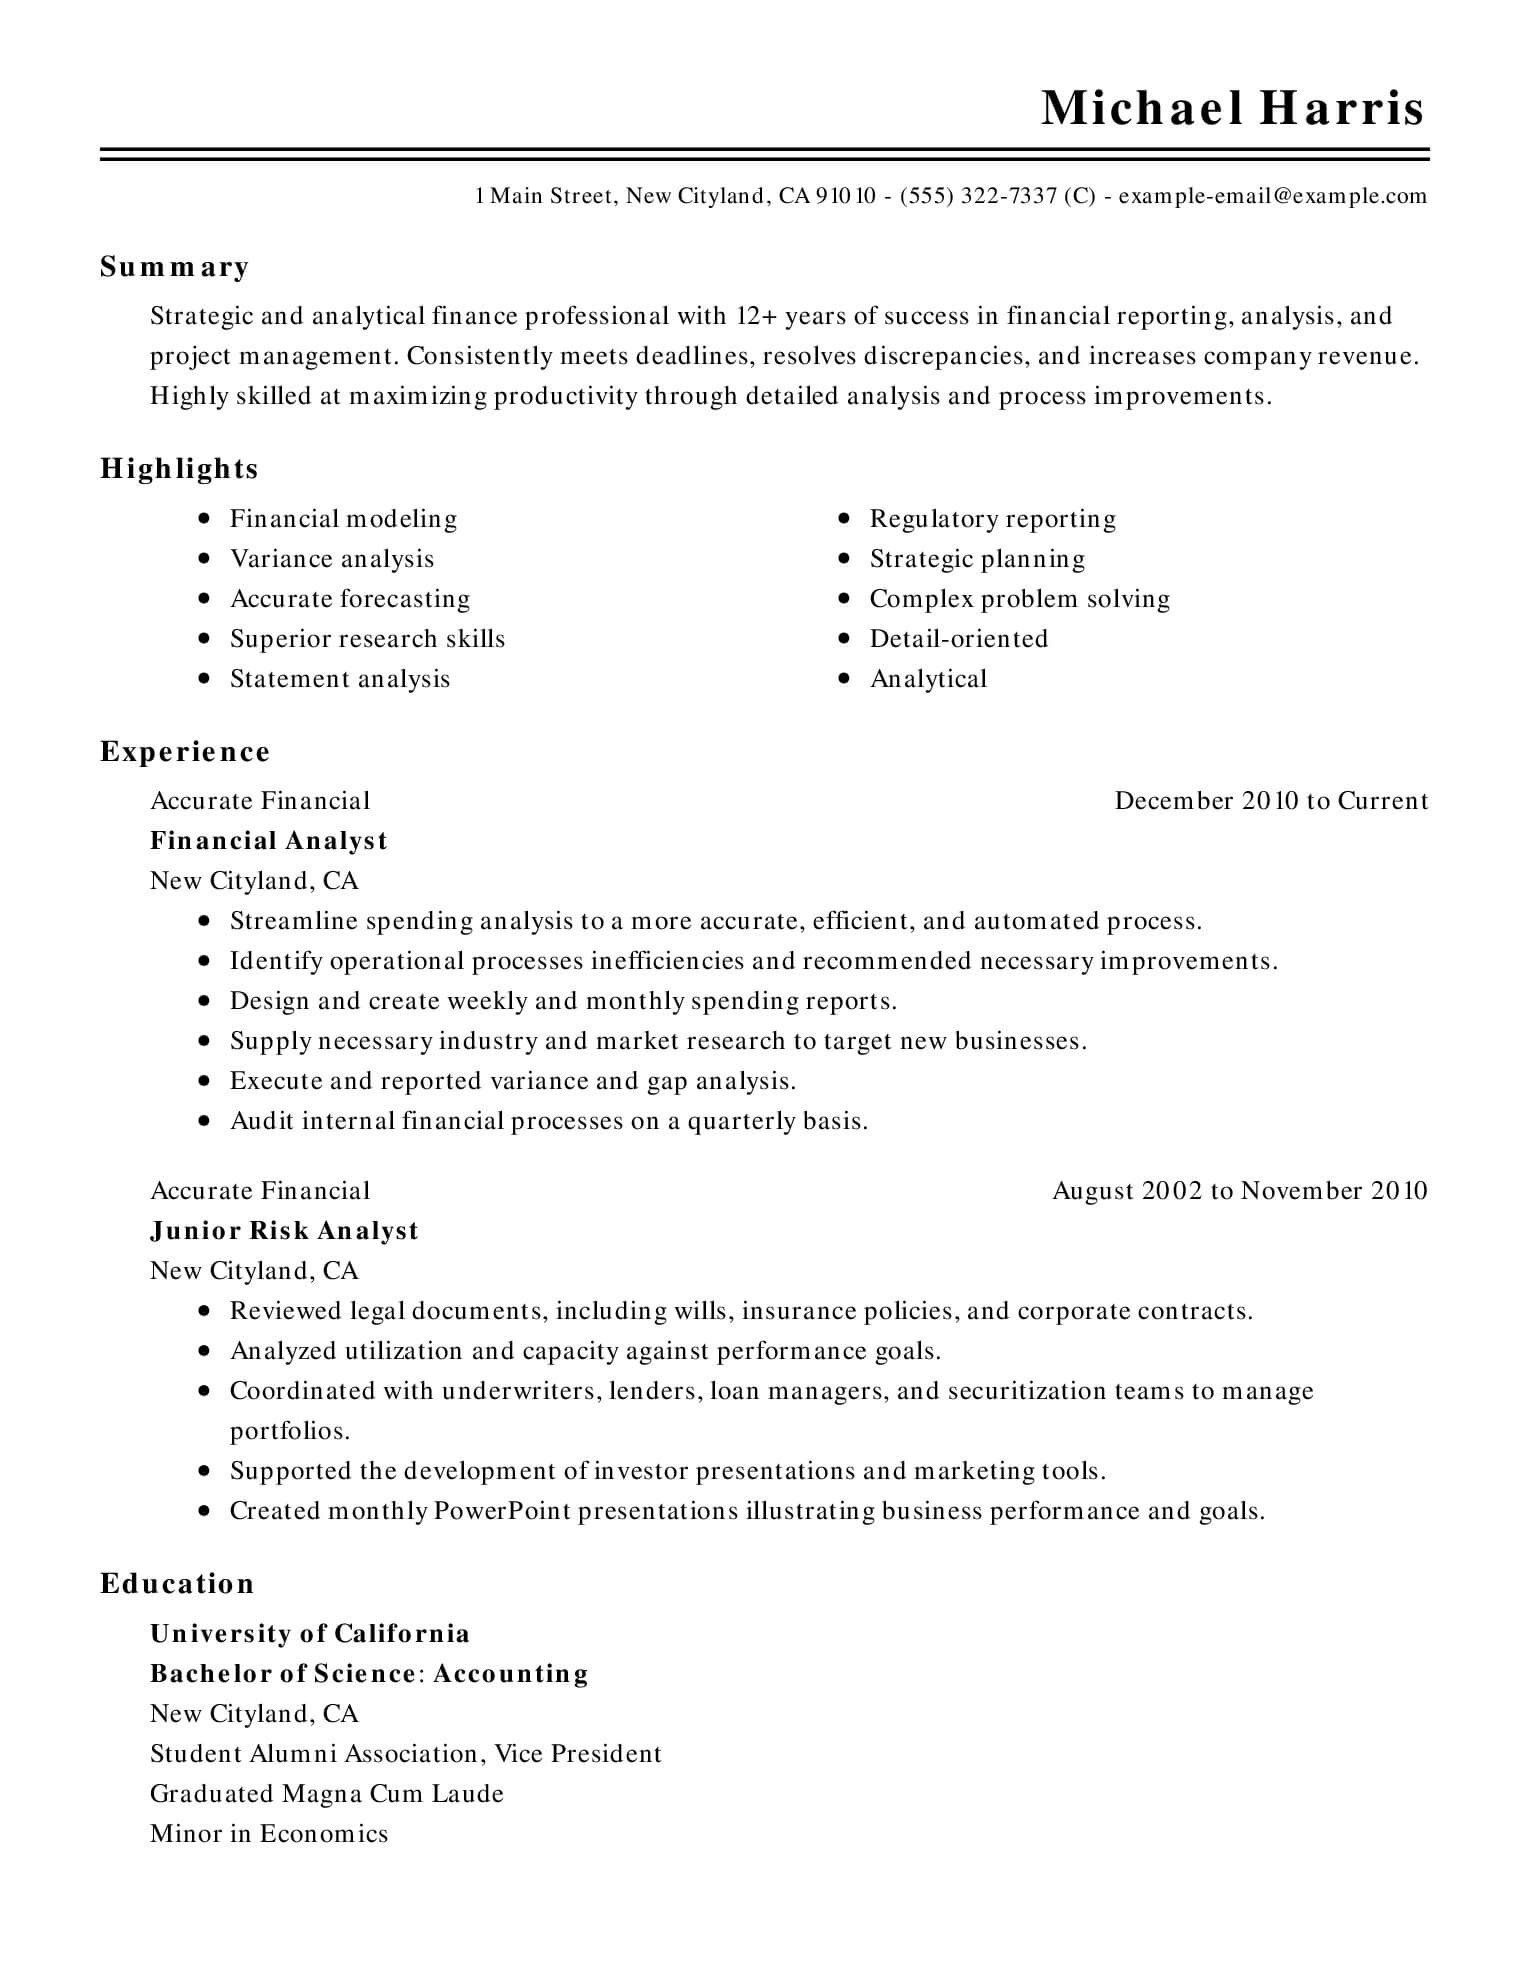 Resume Templates On Word 15 Of the Best Resume Templates for Microsoft Word Fice